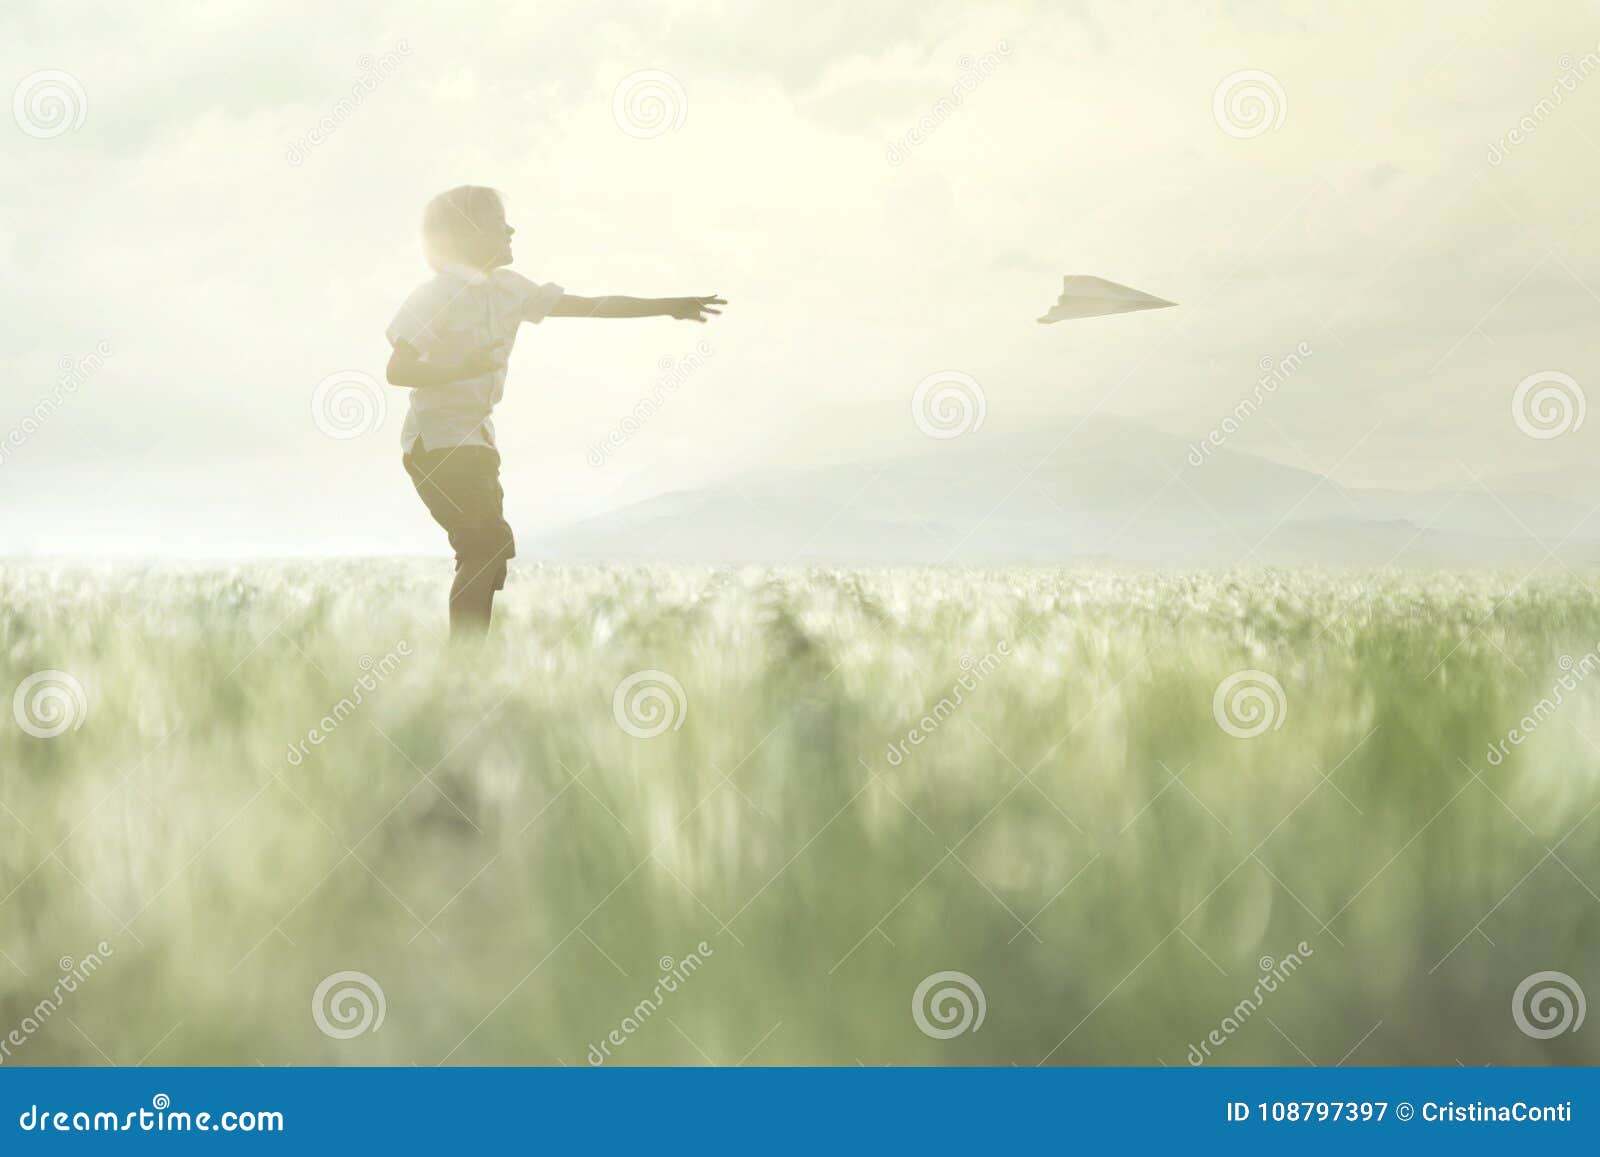 young boy makes his paper airplane fly in a meadow